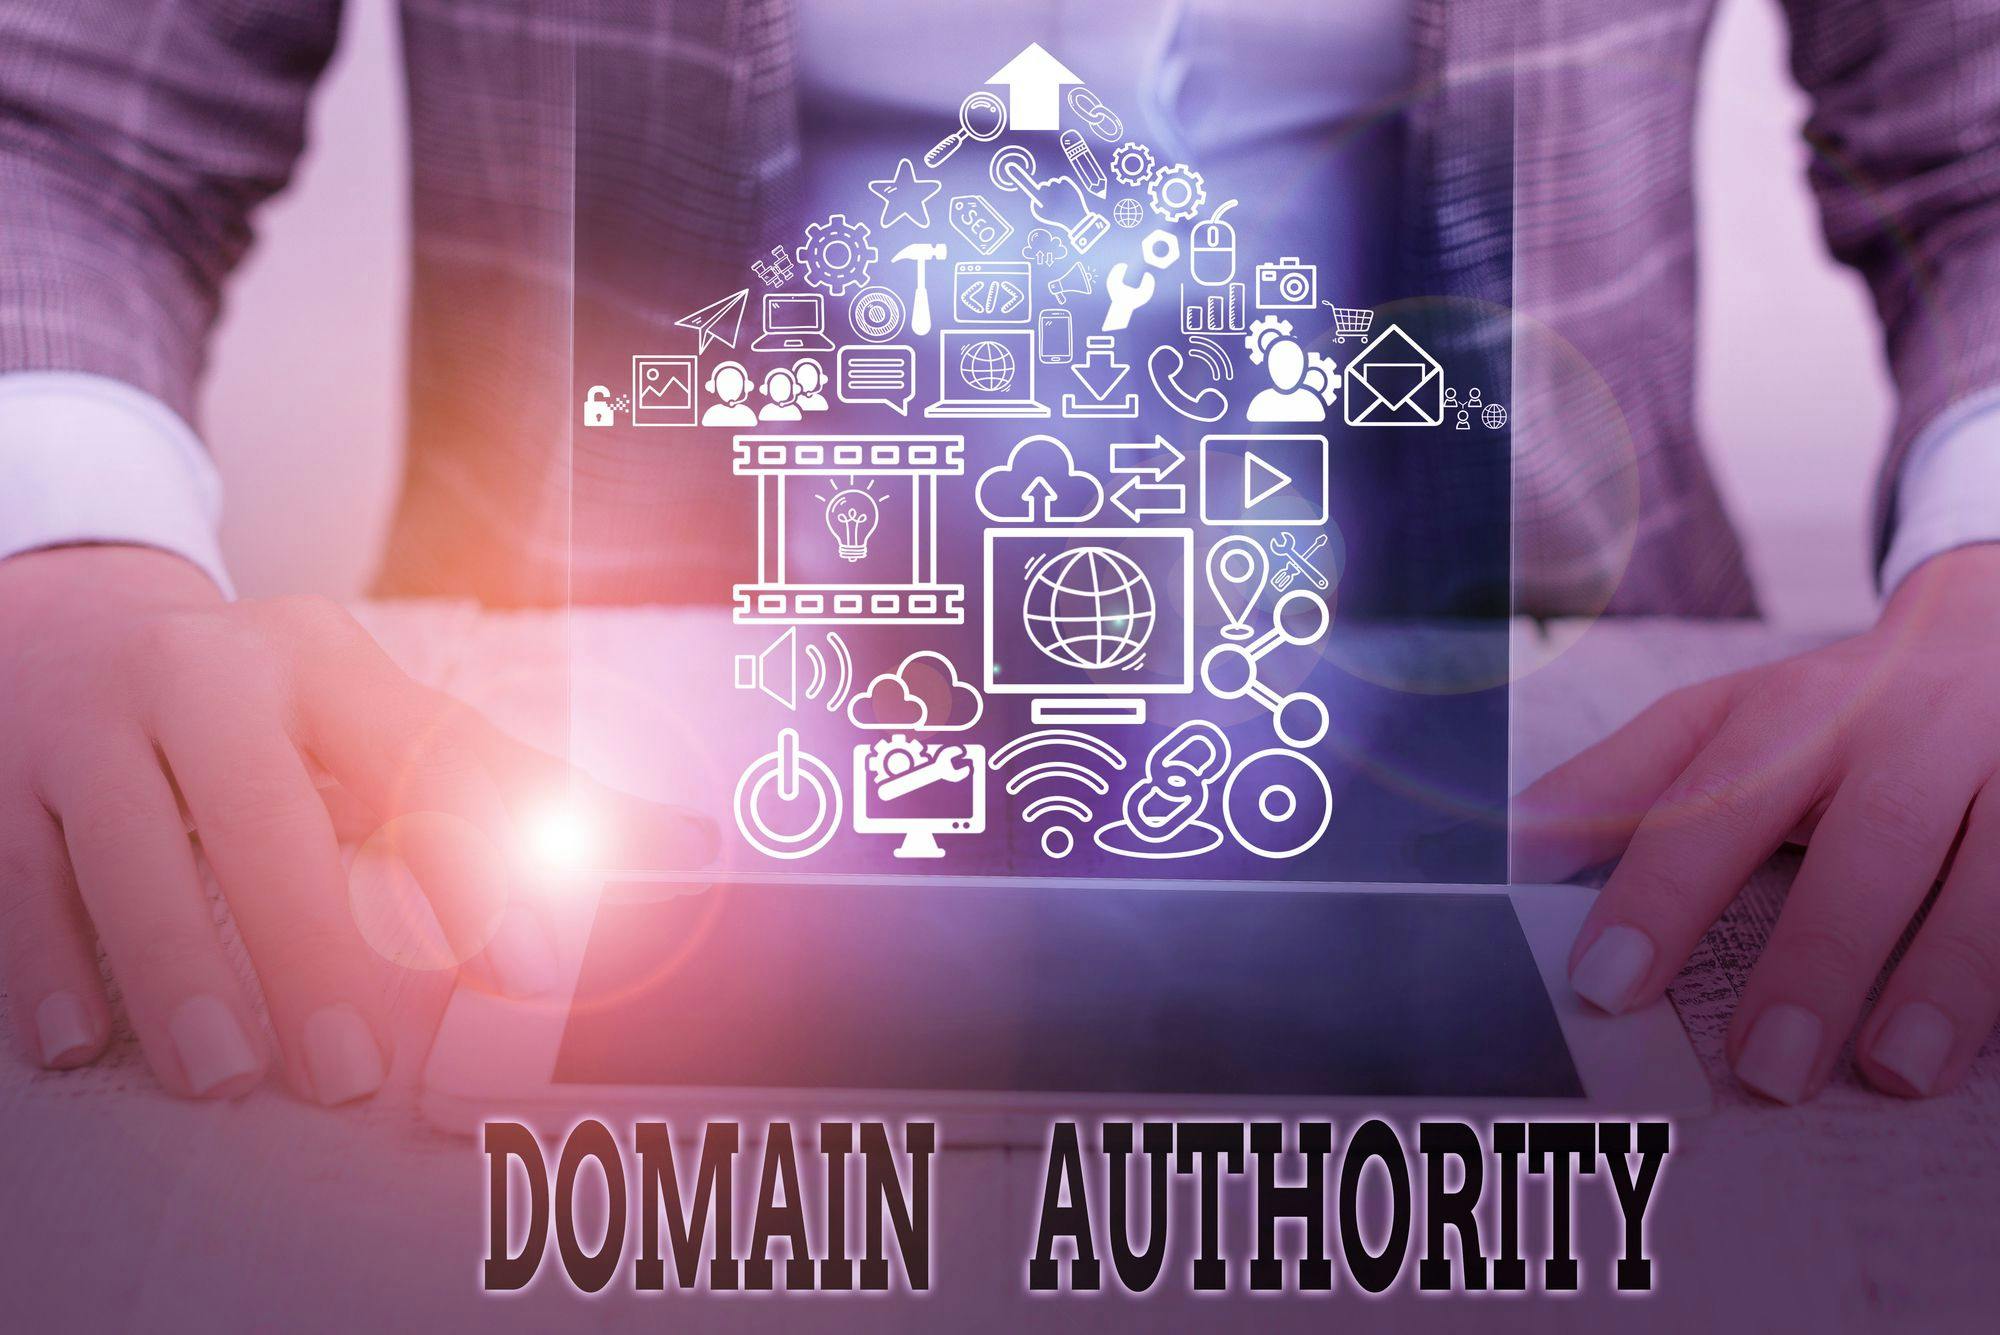 Explore the importance of Domain Authority in SEO and discover how quality backlinks influence your site's DA score, credibility, and ranking potential.